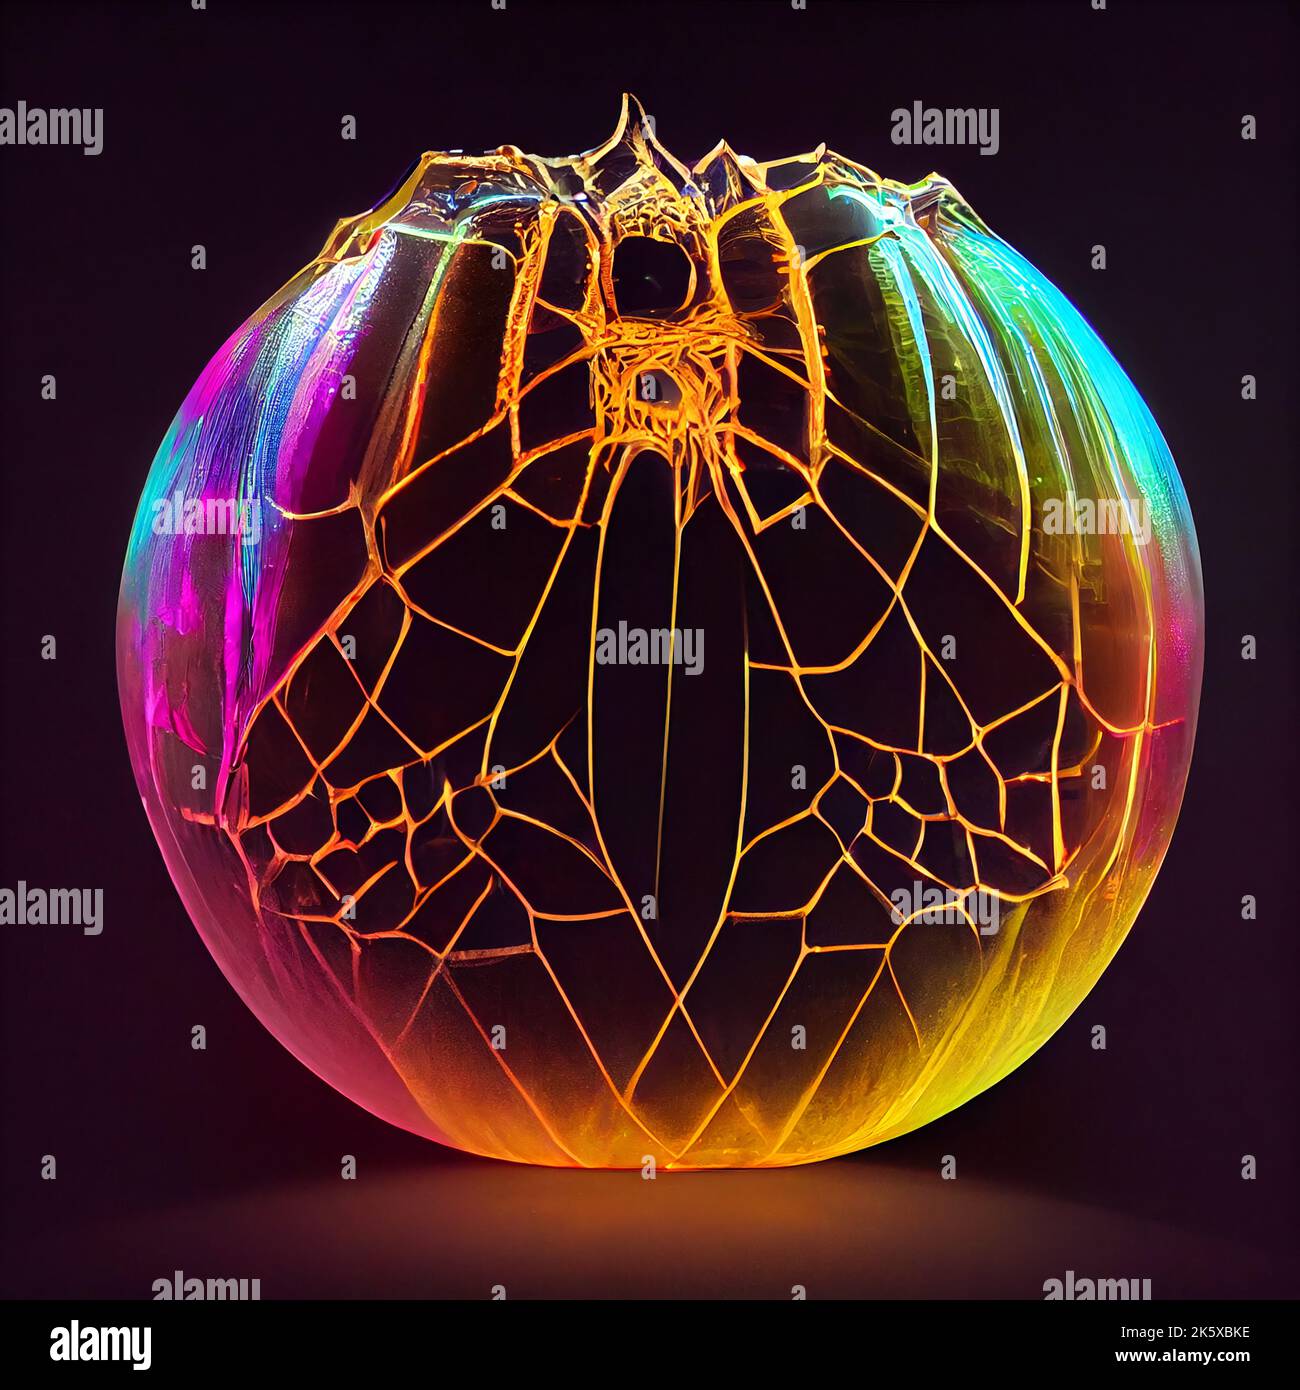 Crystal pumpkins covered in cobwebs, discovered in a cellar. Iridescent light plays on the surface with a spectrum of colors, lit from inside. Stock Photo